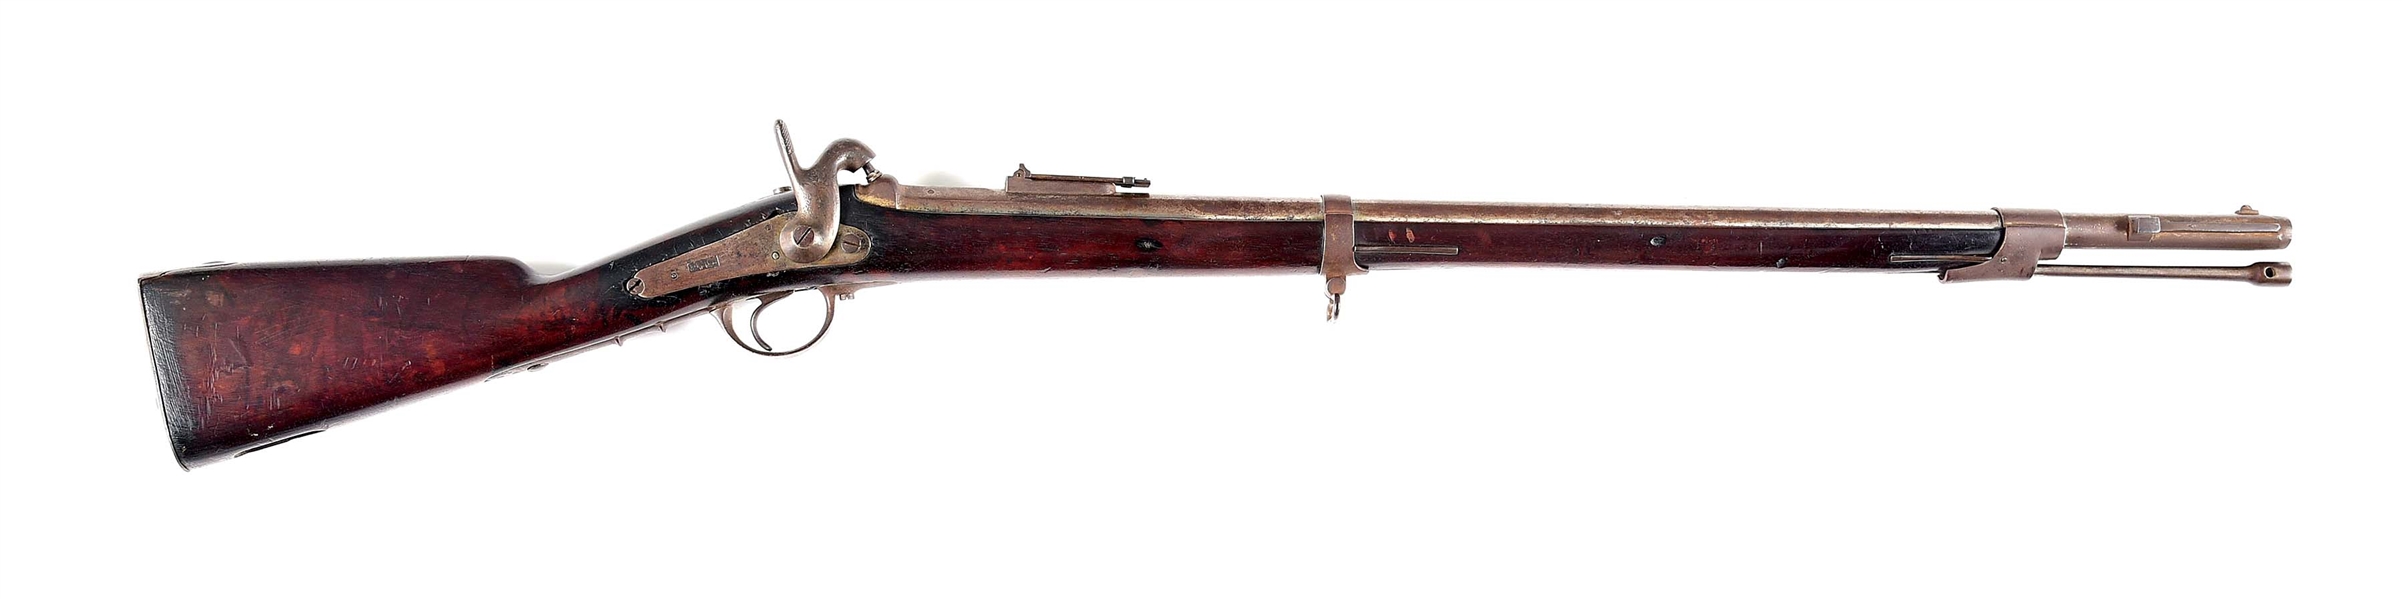 (A) FRENCH MODEL 1842 RIFLED MUSKET.